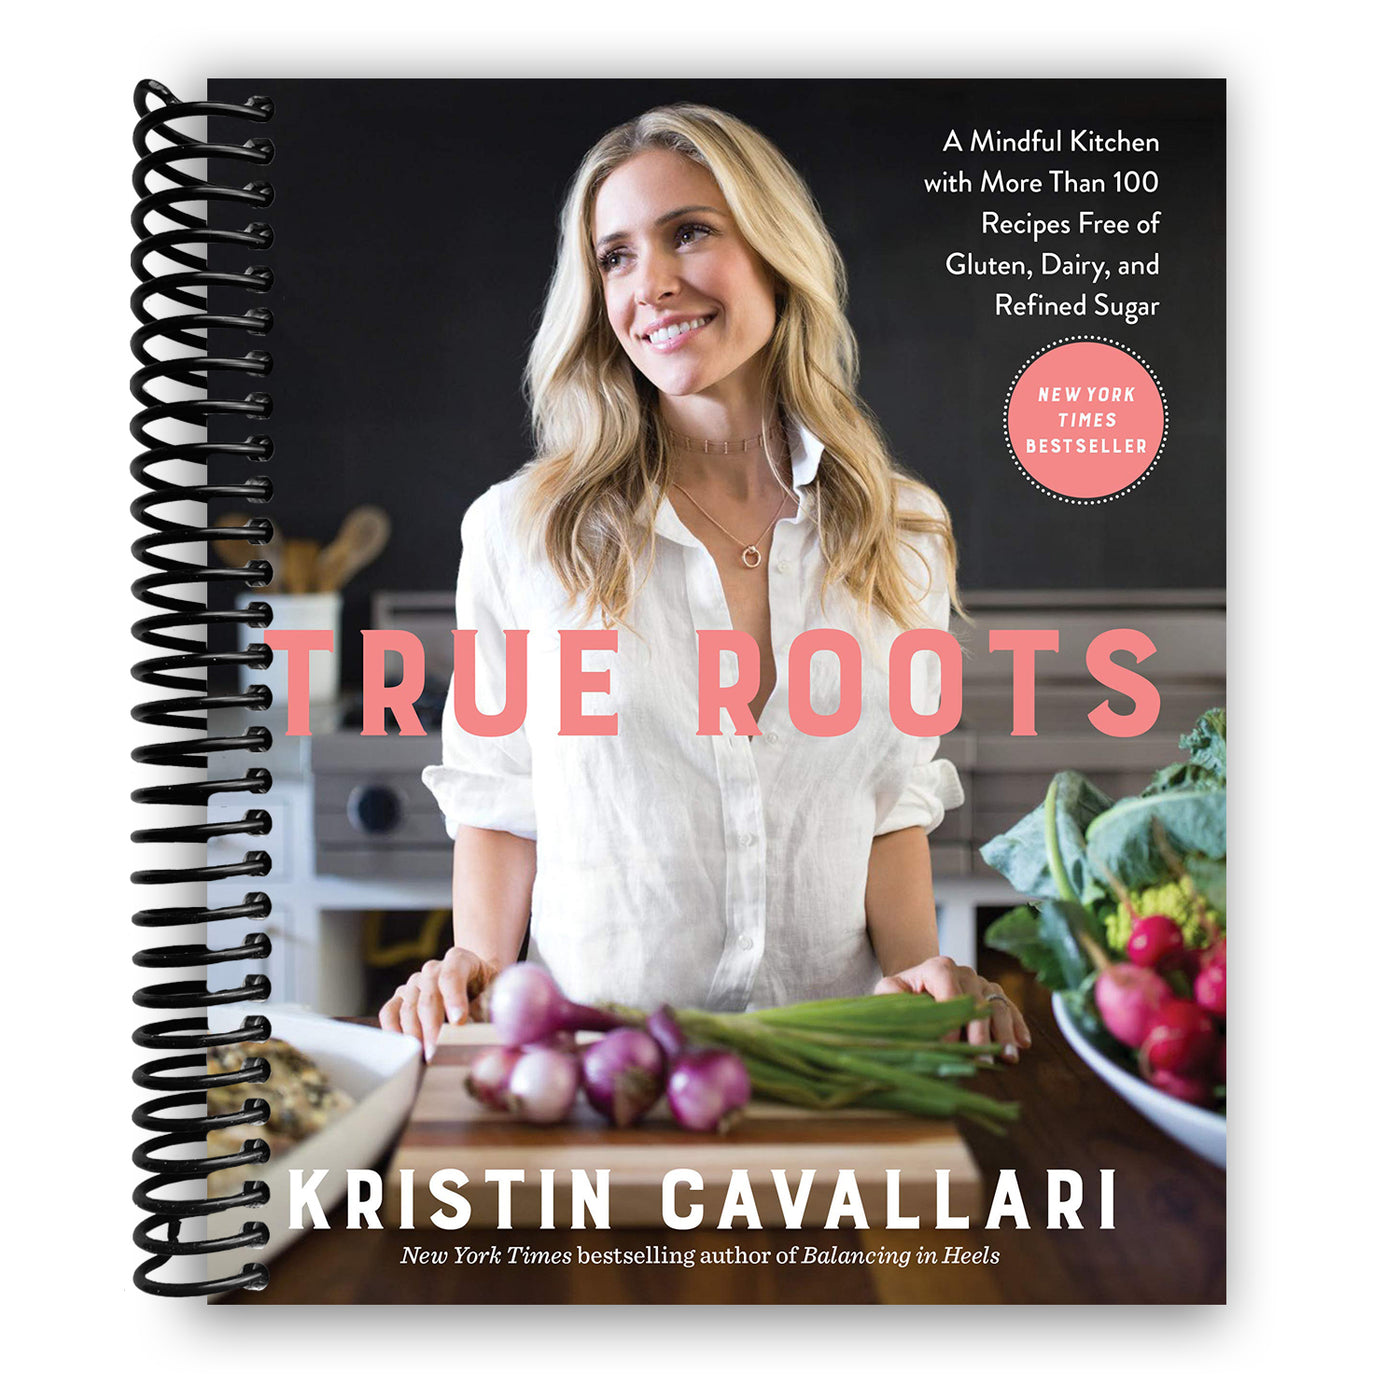 True Roots: A Mindful Kitchen with More Than 100 Recipes Free of Gluten, Dairy, and Refined Sugar (Spiral Bound)